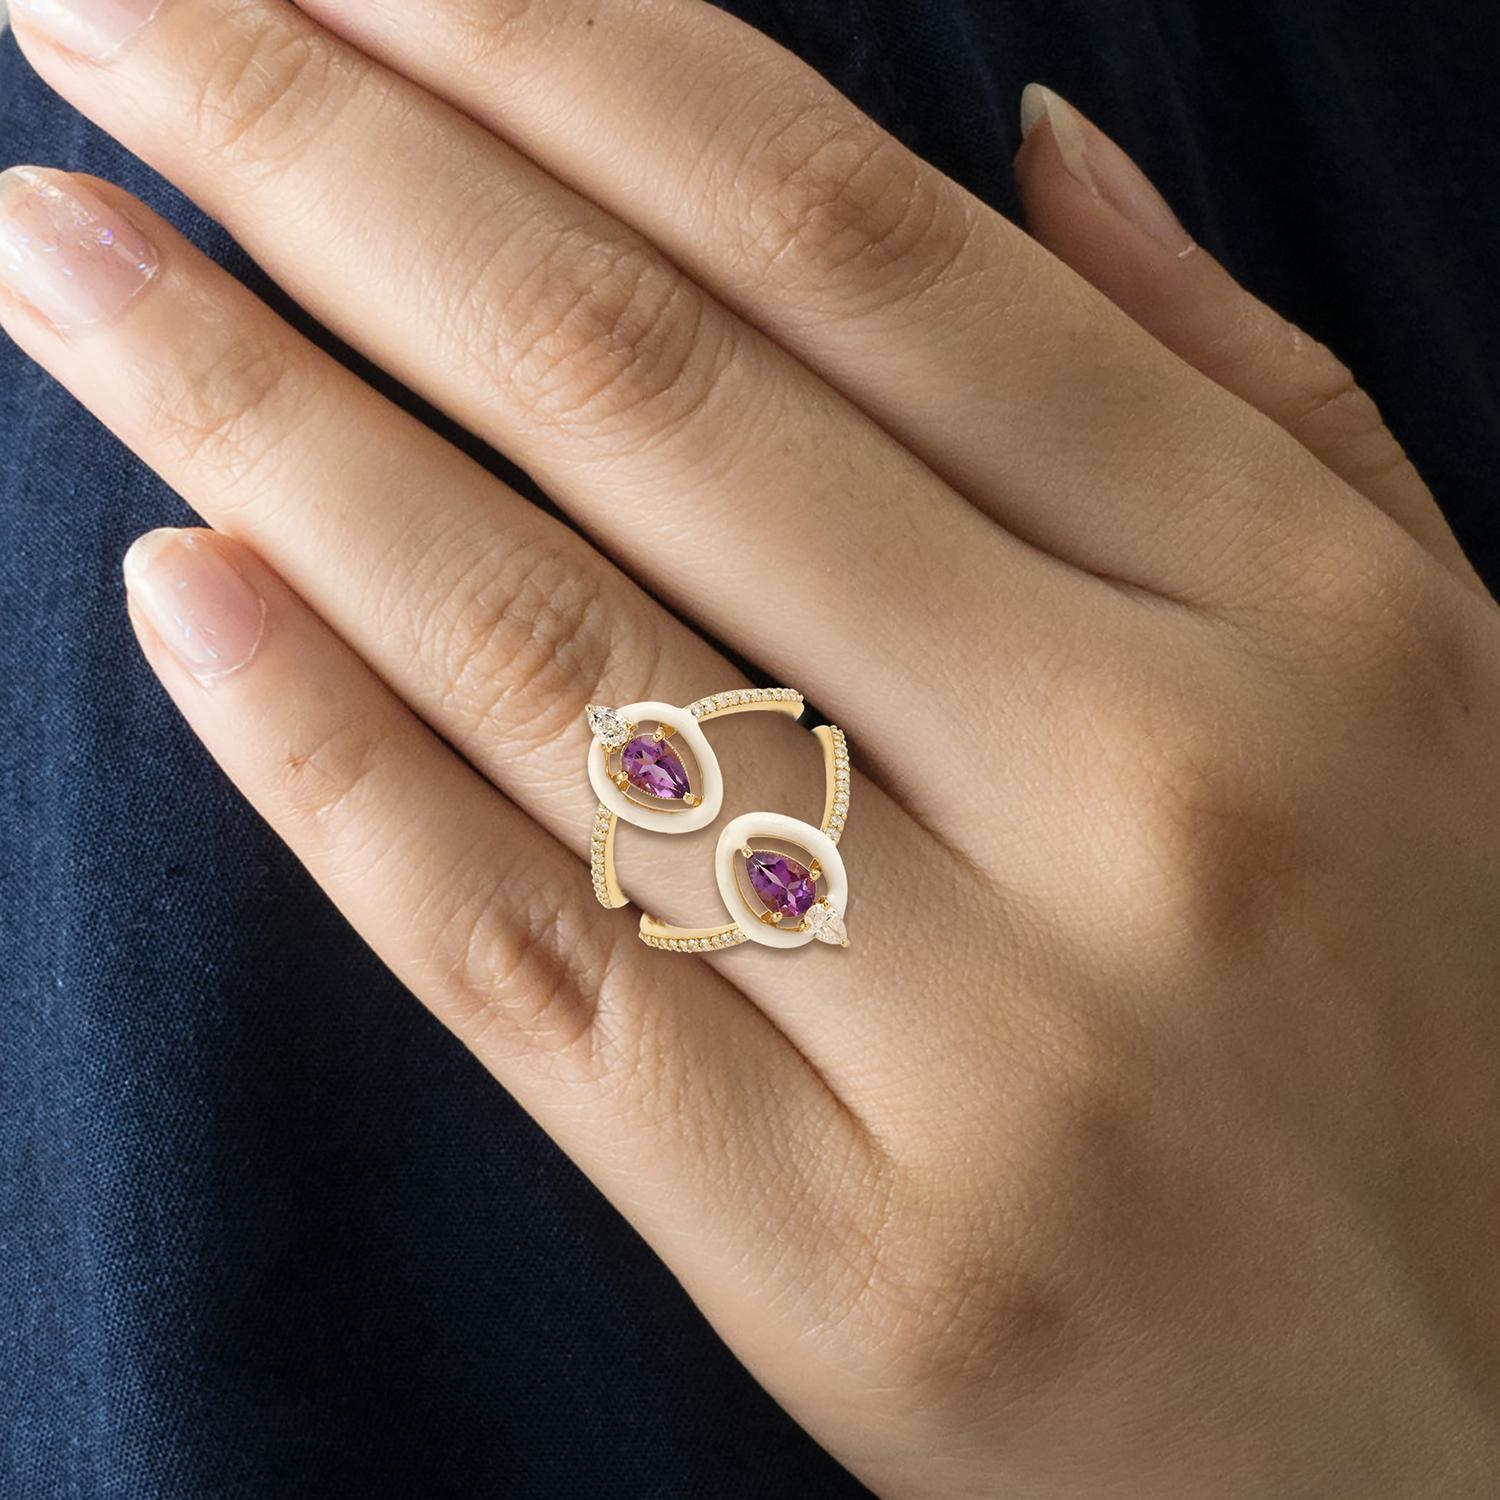 This ring has been meticulously crafted from 14-karat gold.  It is hand set with 1.13 carats amethyst & .44 carats of sparkling diamonds. 

The ring is a size 7 and may be resized to larger or smaller upon request. 
FOLLOW  MEGHNA JEWELS storefront